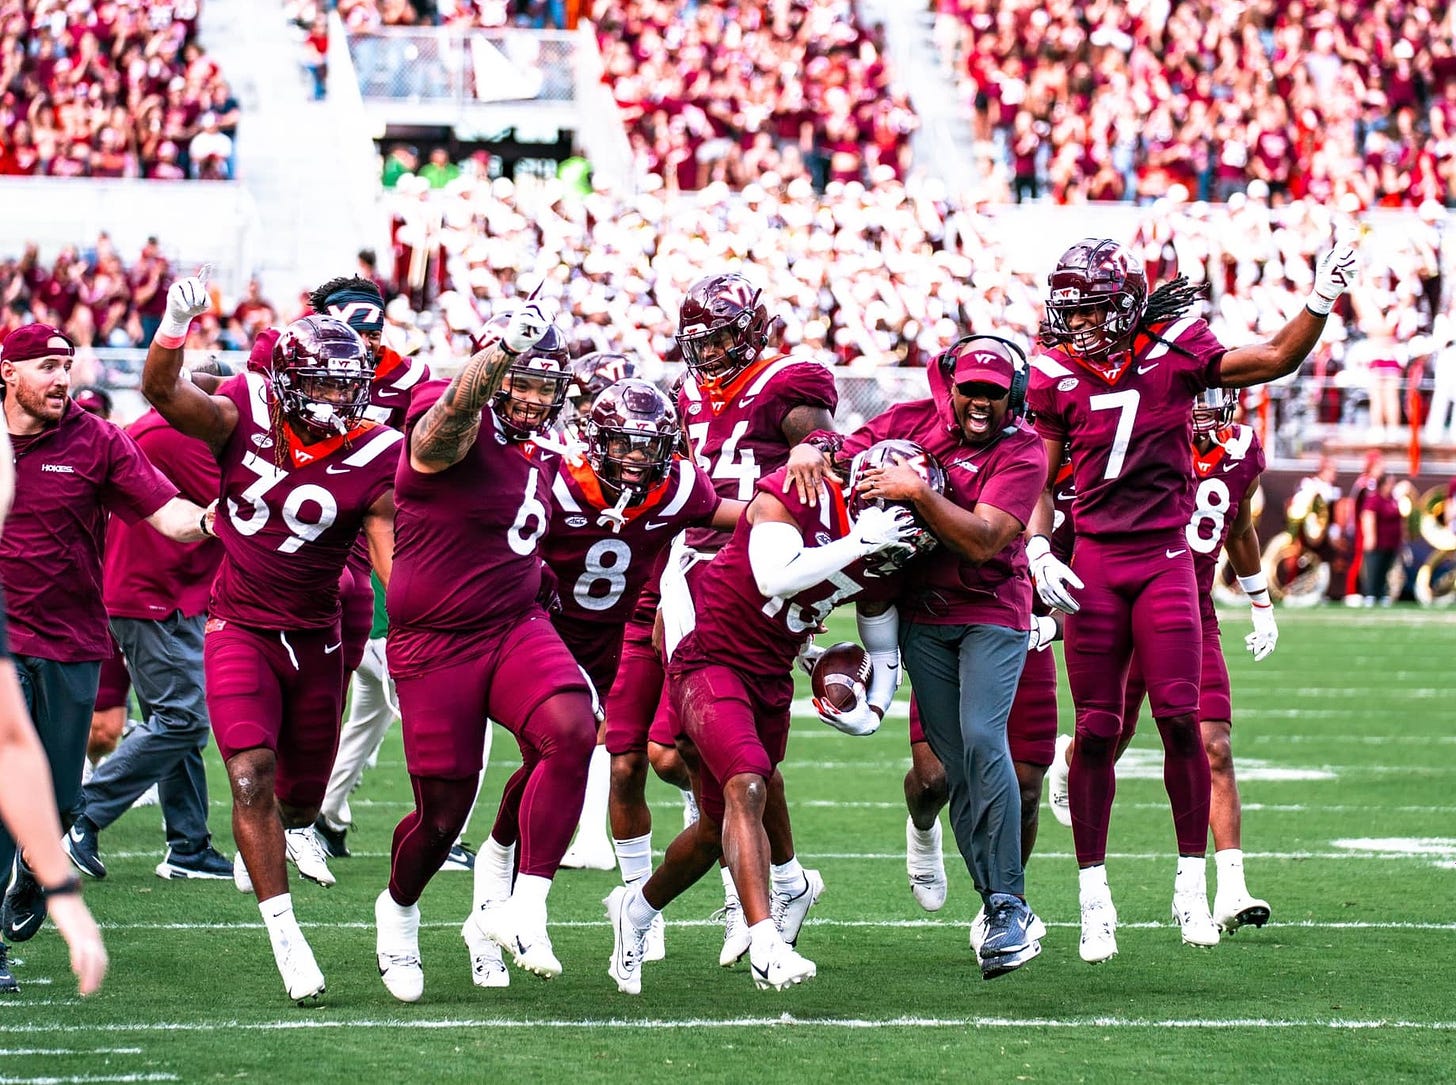 Virginia Tech celebrates after an interception against Wake Forest.